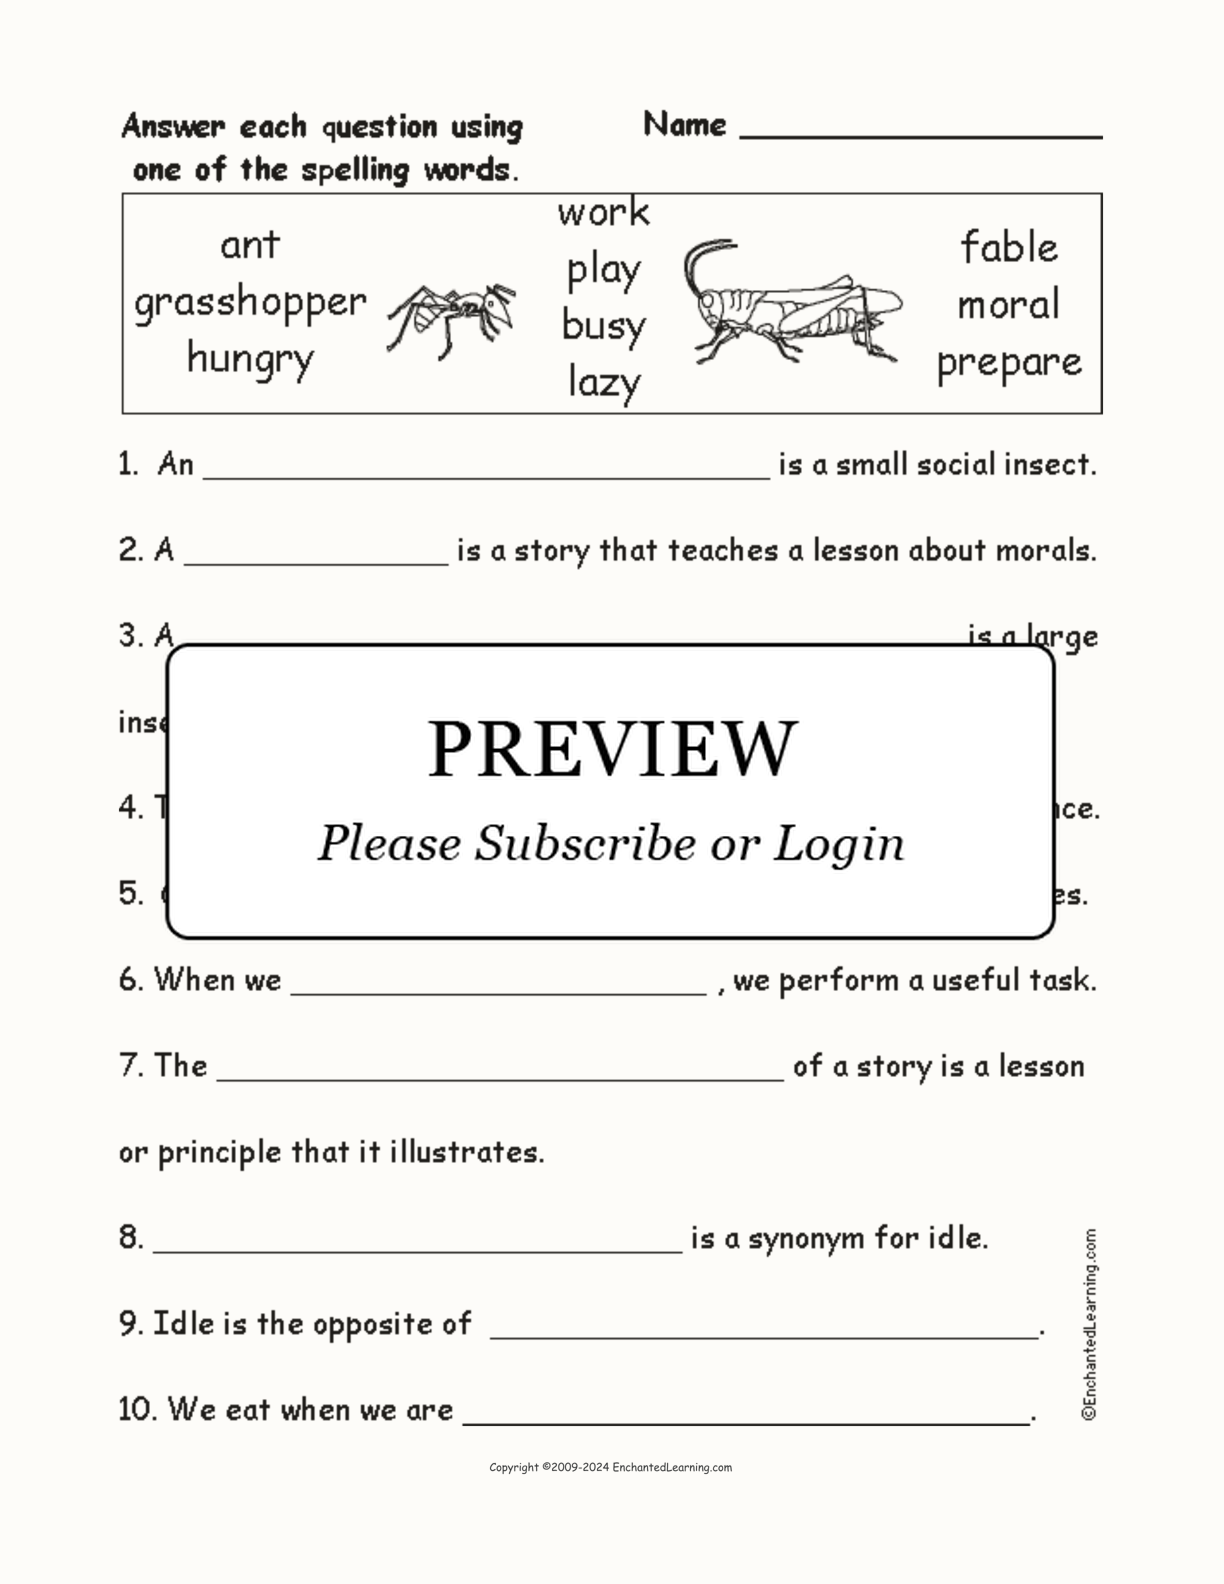 'The Ant and The Grasshopper' Spelling Questions interactive worksheet page 1